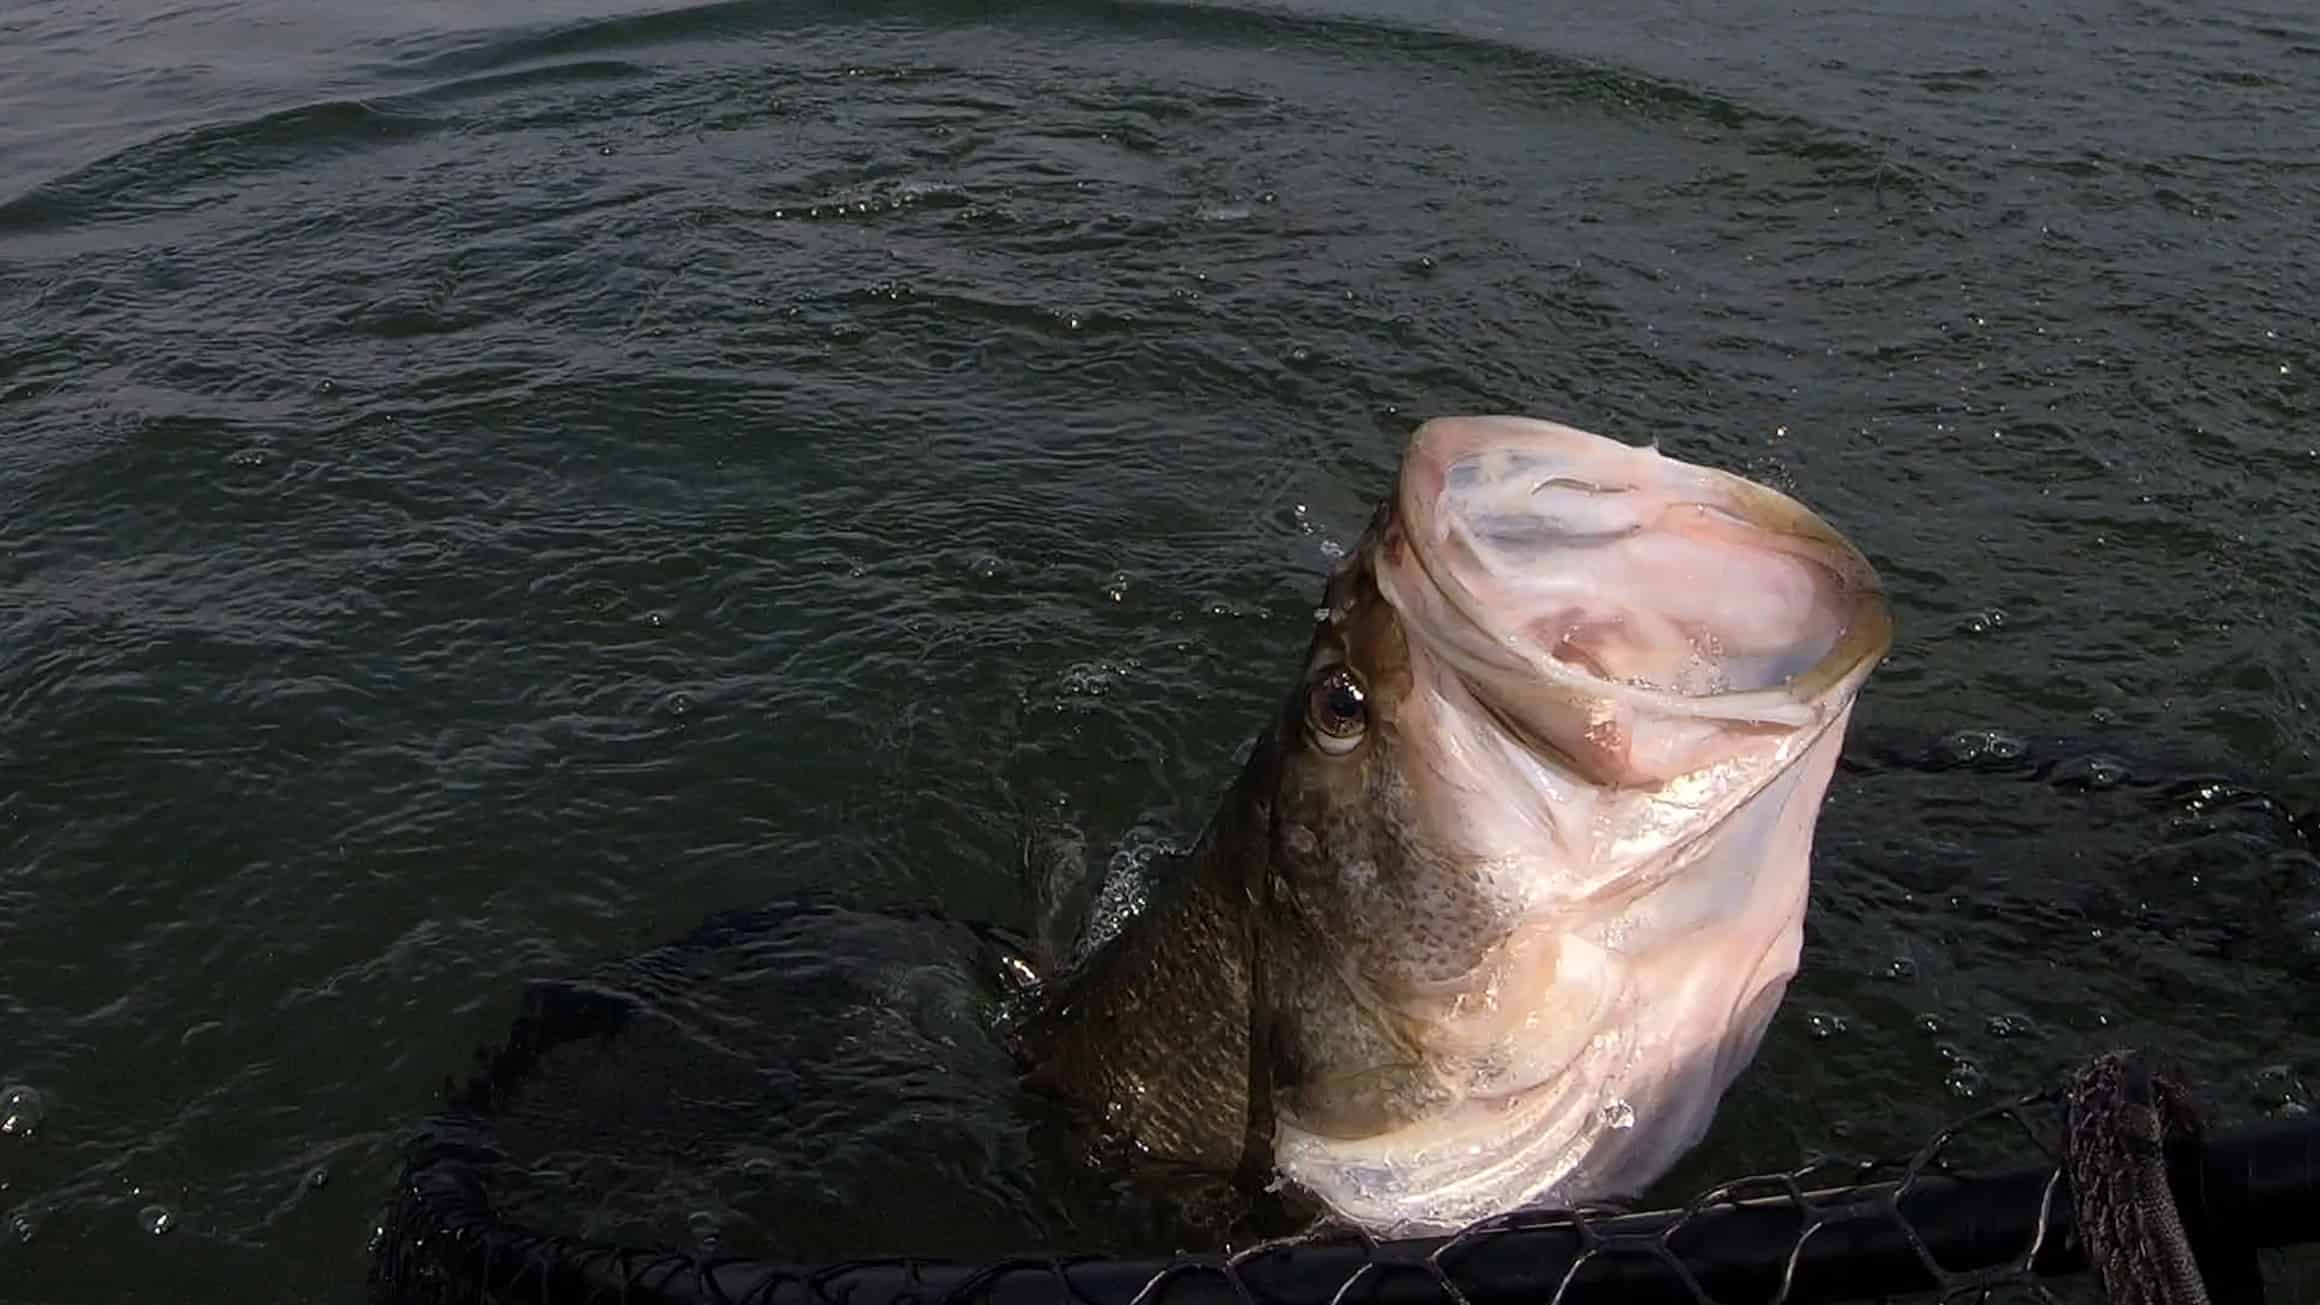 Largemouth Bass going into a net with his mouth open. Fish was released unharmed.